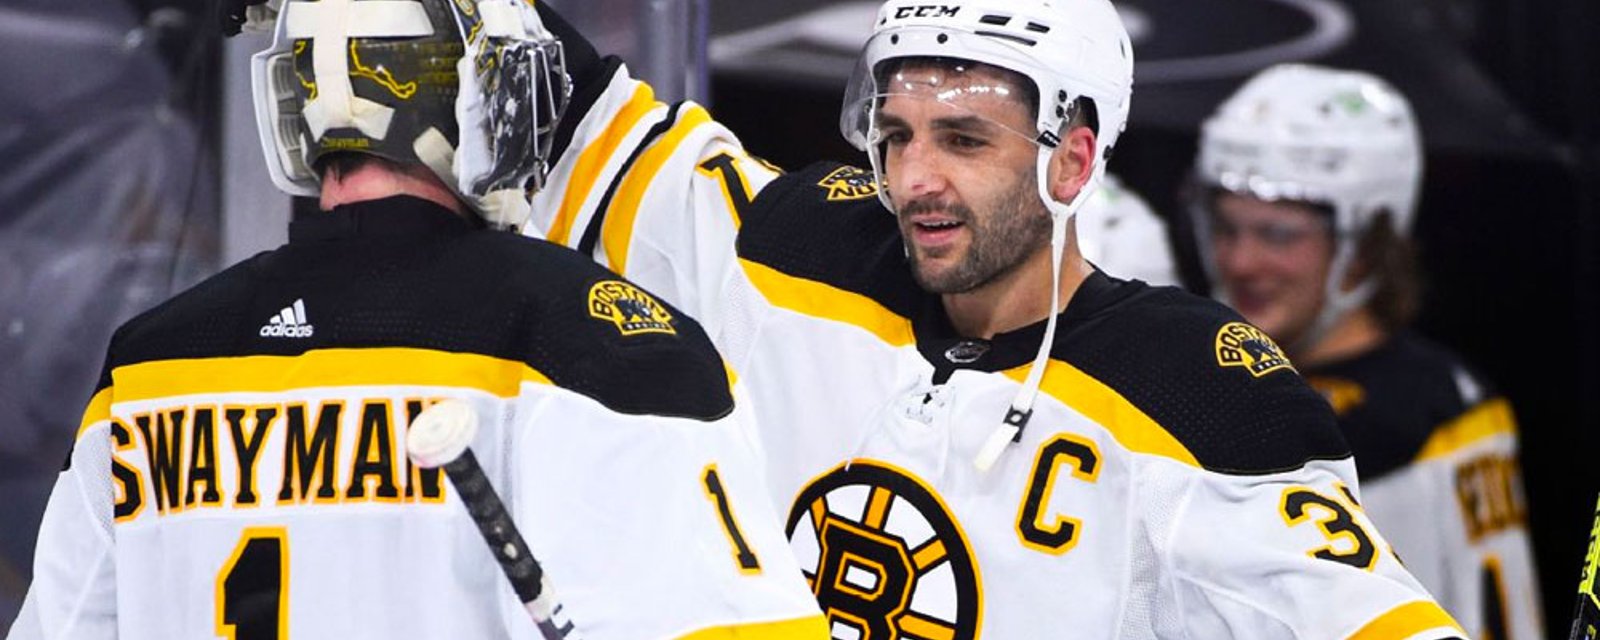 Swayman not happy after negotiations with Bruins